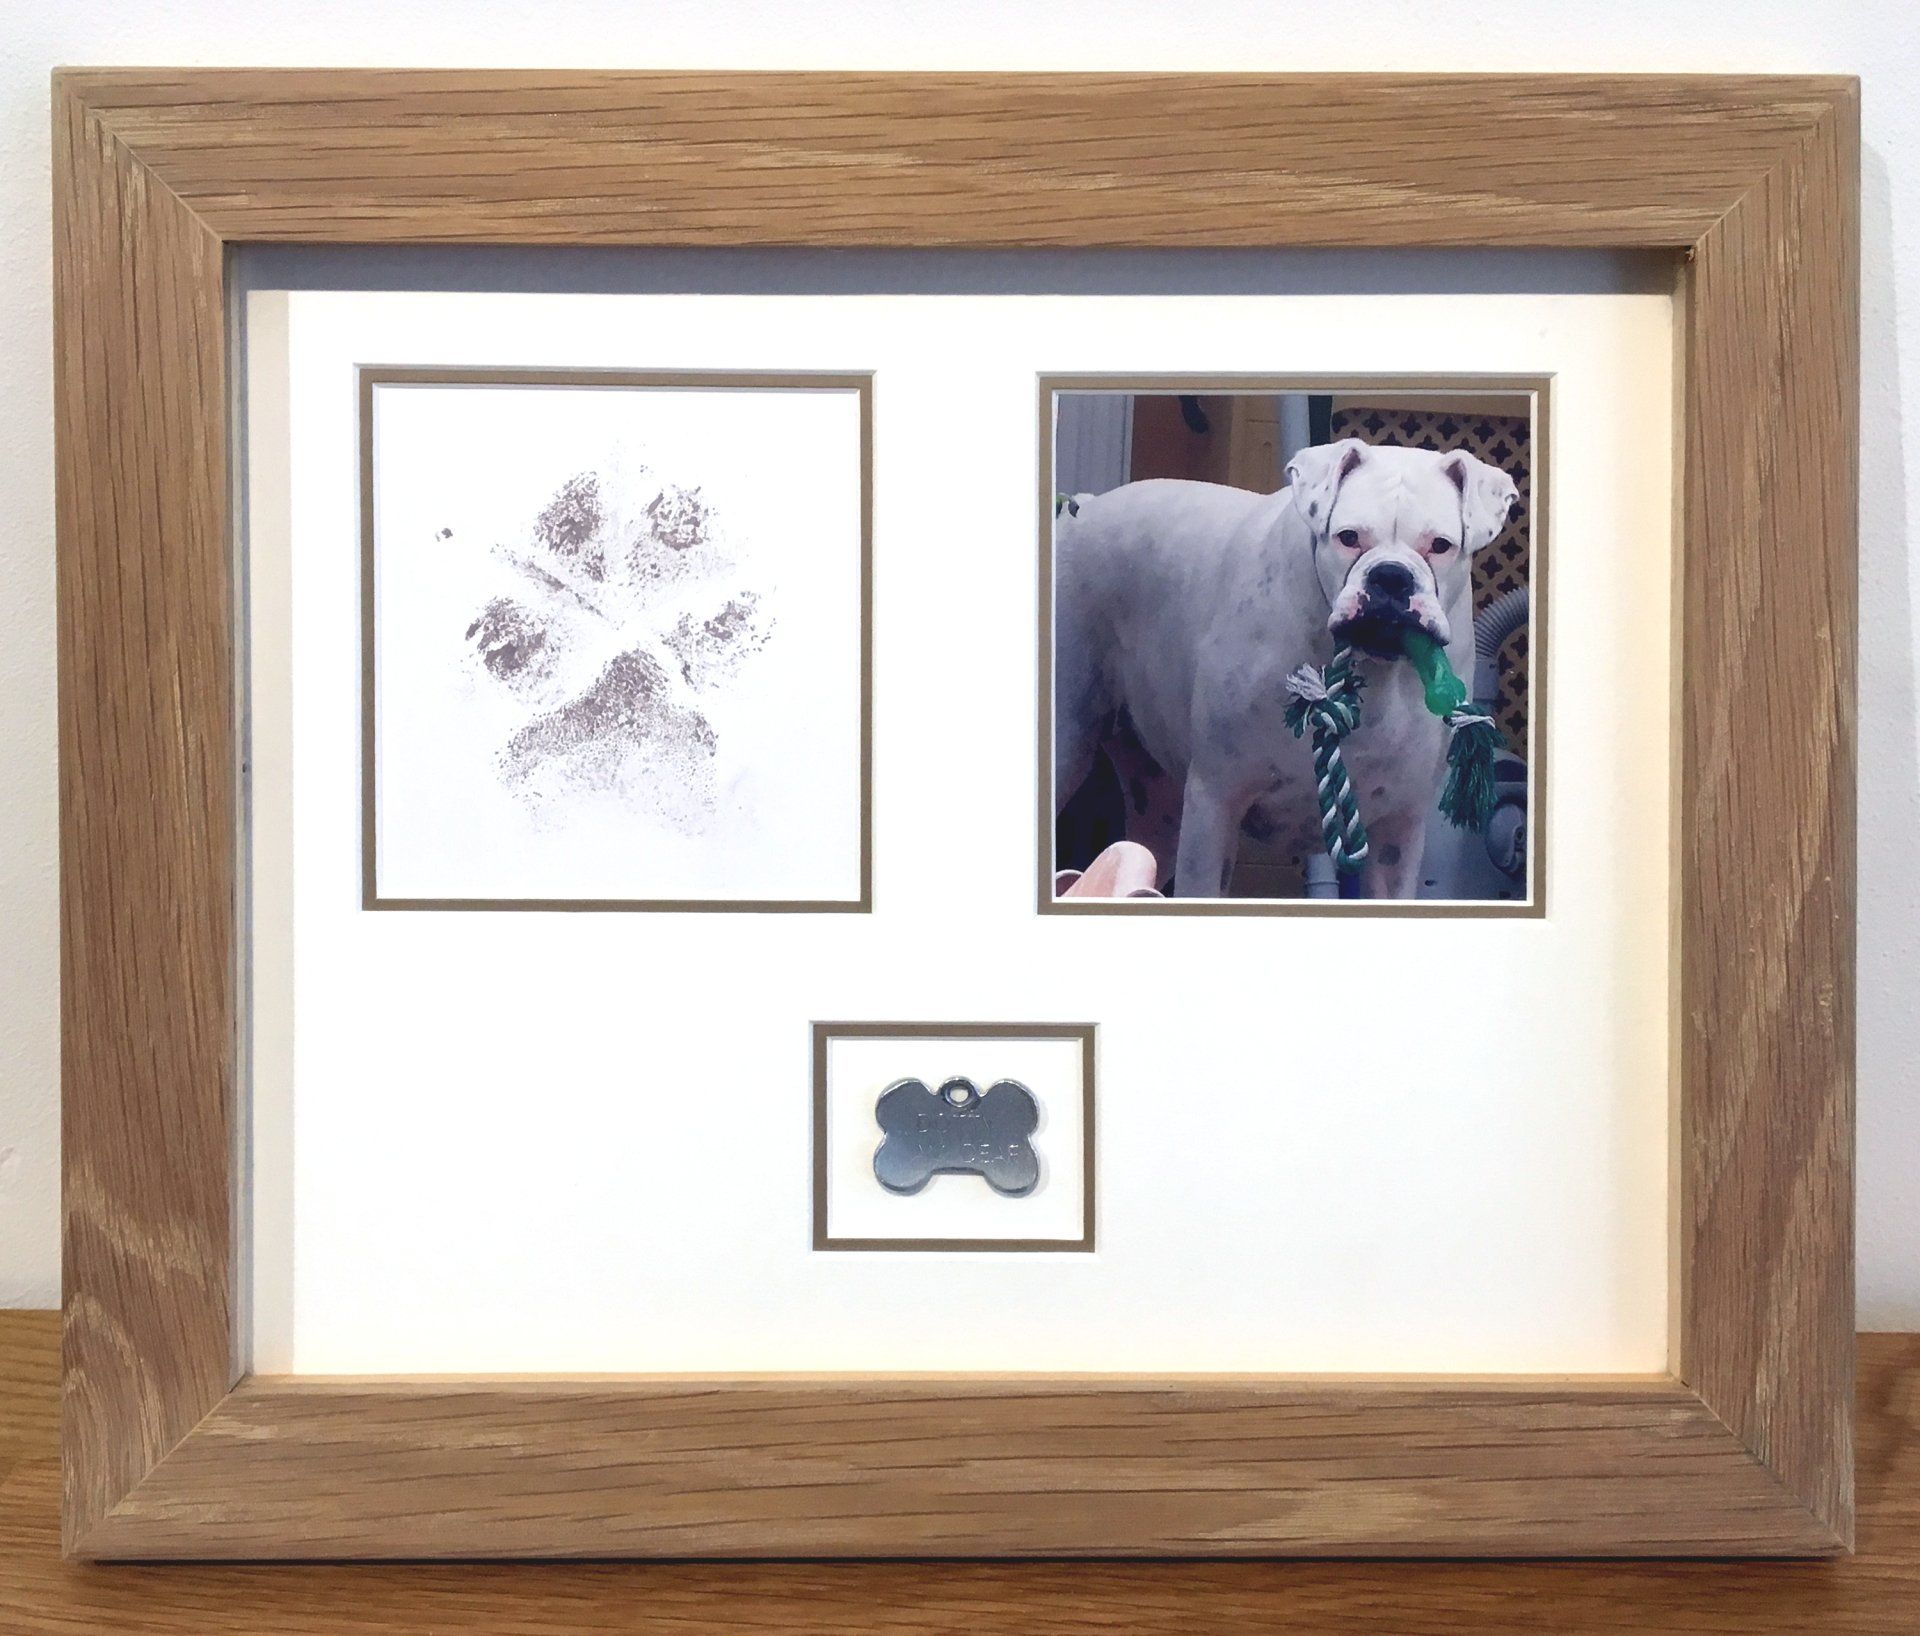 Paw print and Tag display of a much missed pet dog